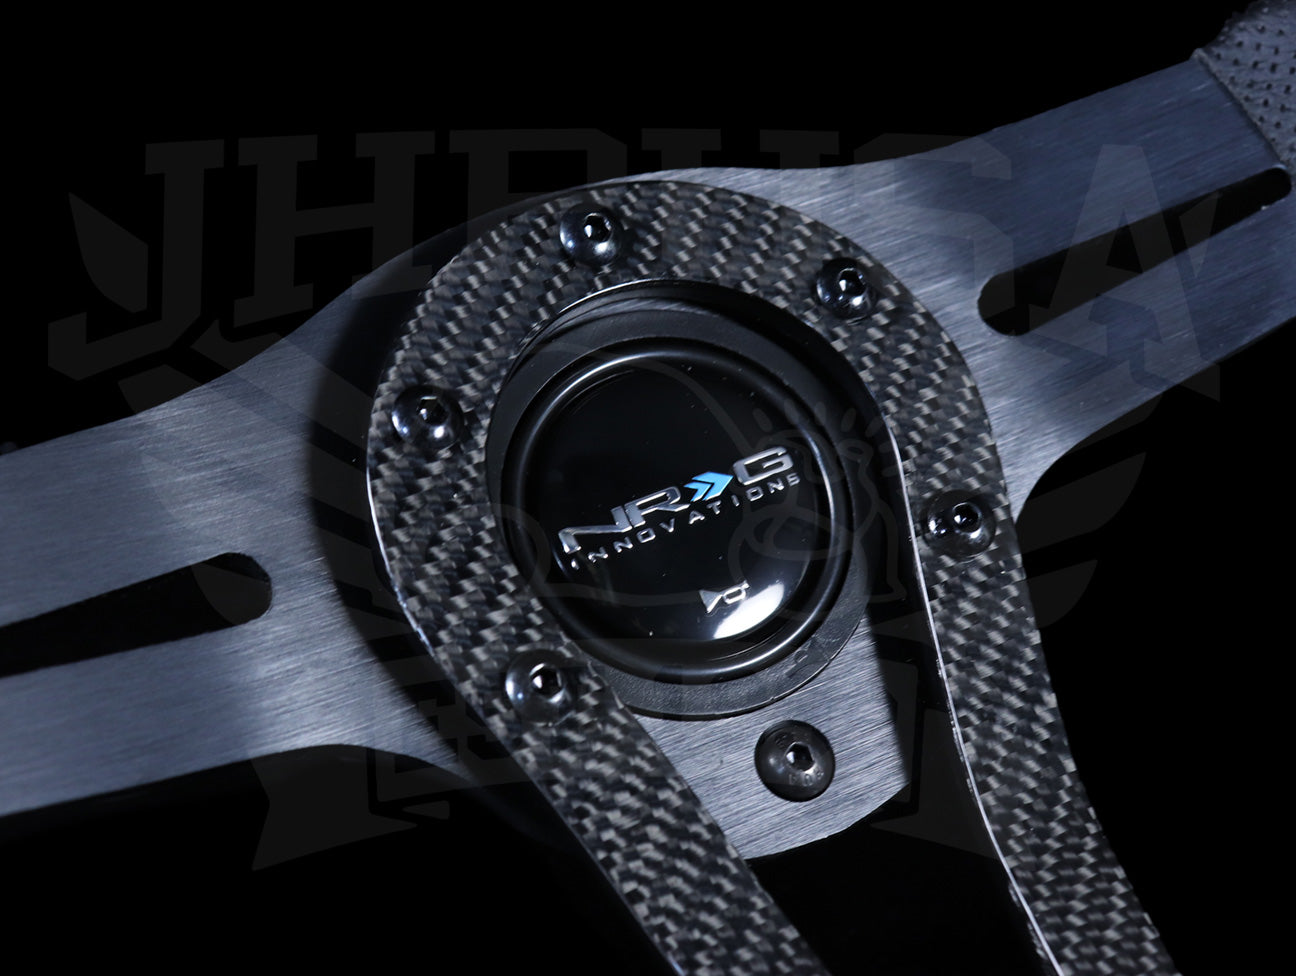 NRG Race Style Carbon Fiber Steering Wheel - 320mm Black Perforated Leather / Black Stitch